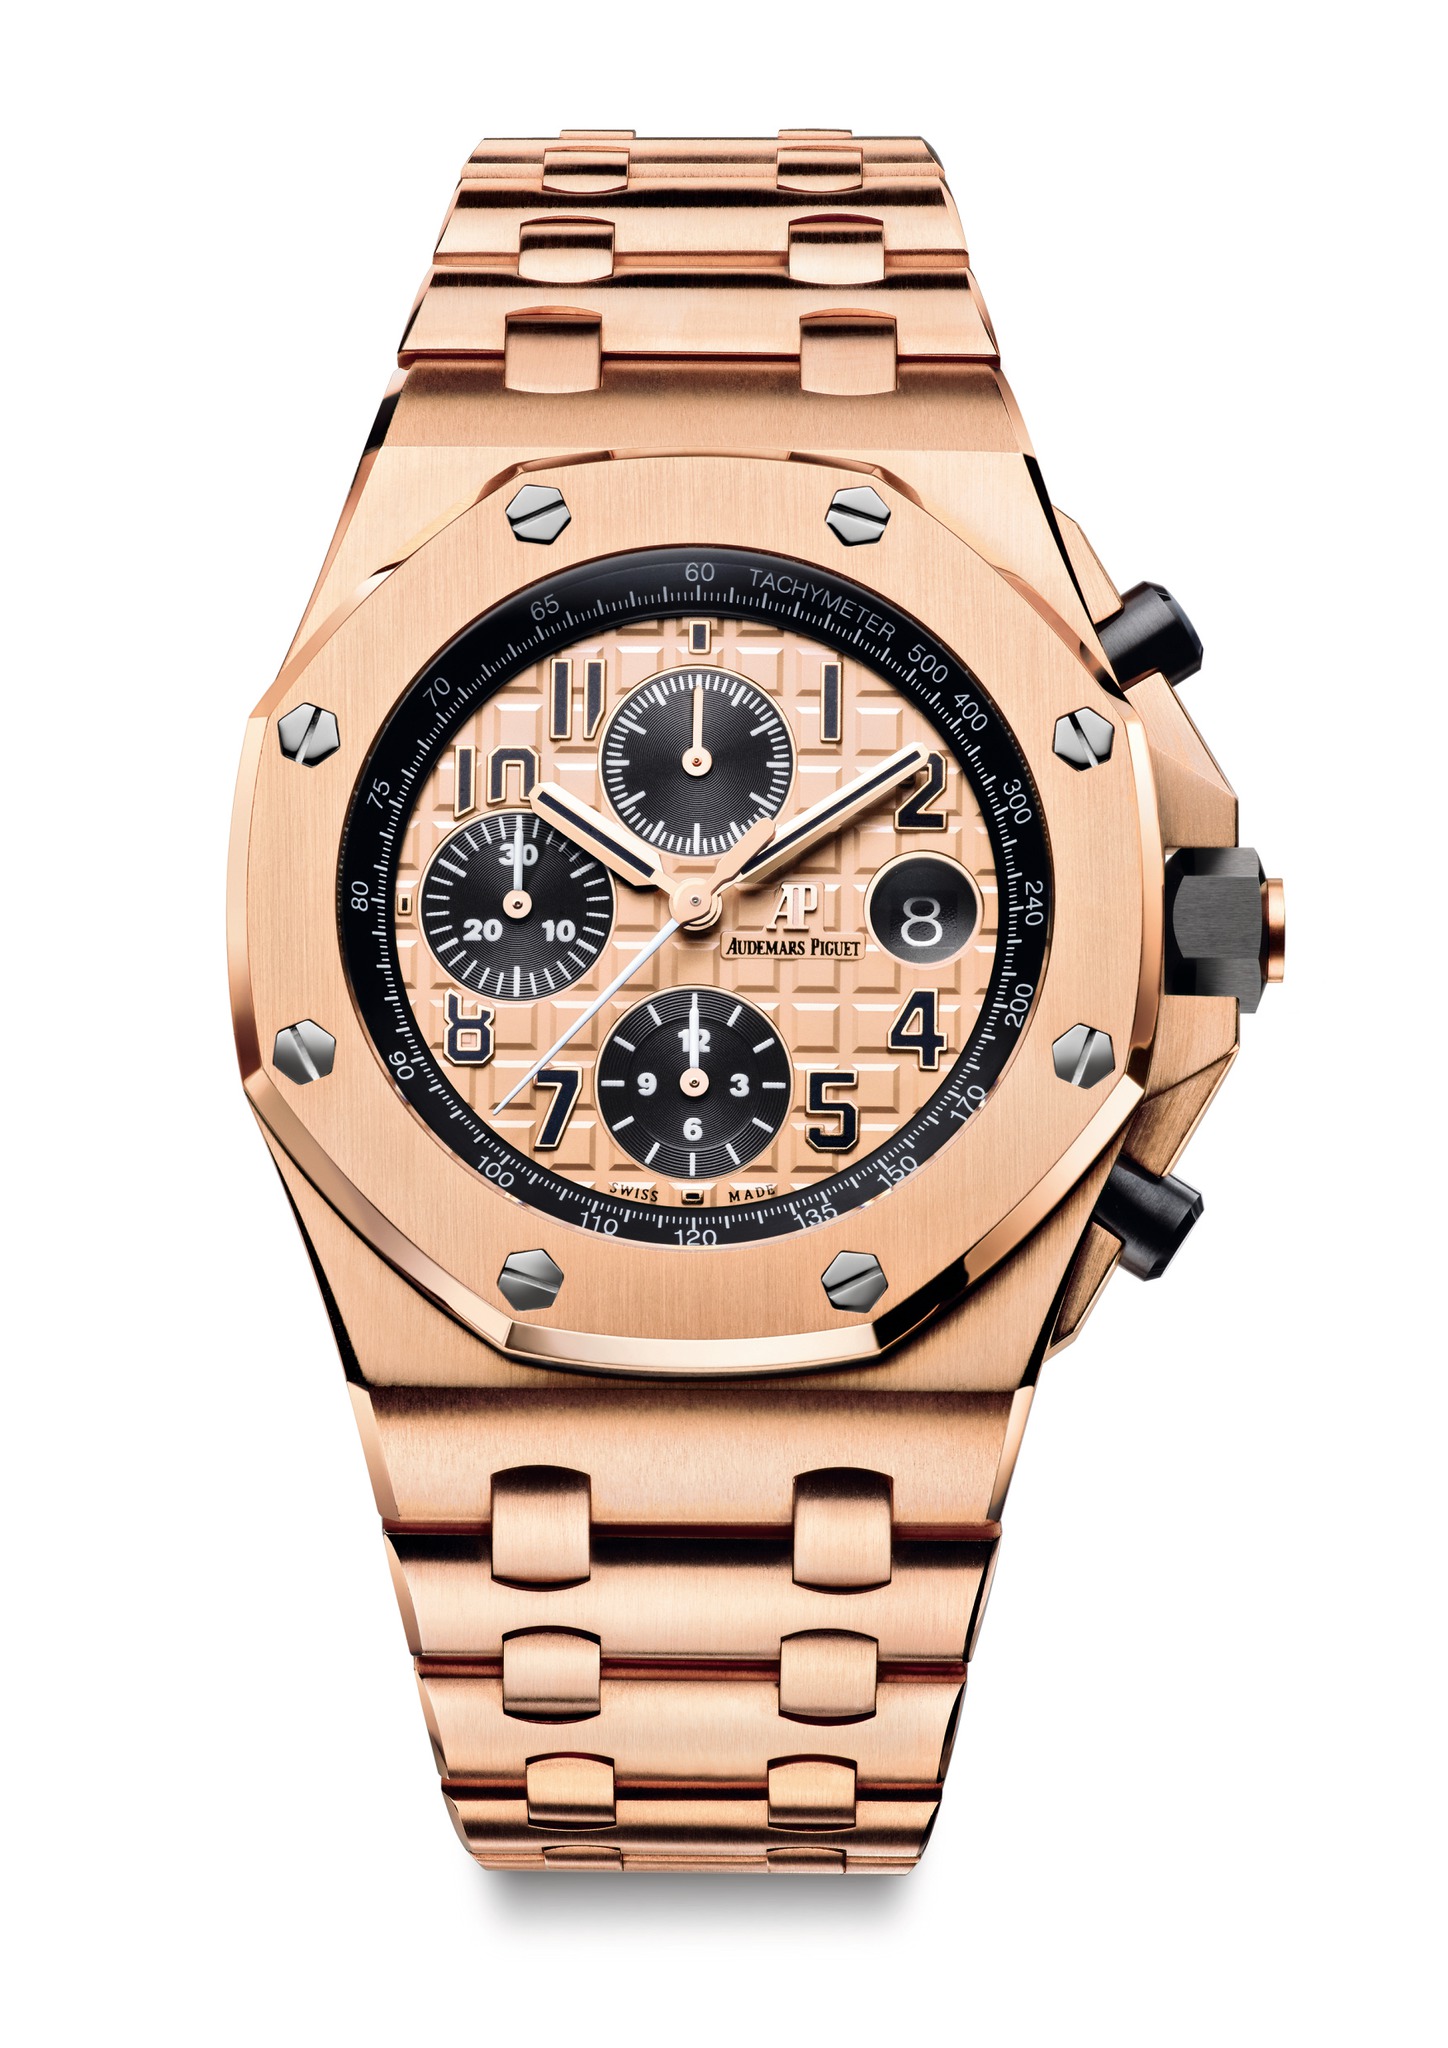 Audemars Piguet New Royal Oak Offshore Chronograph Pink Gold watch REF: 26470OR.OO.1000OR.01